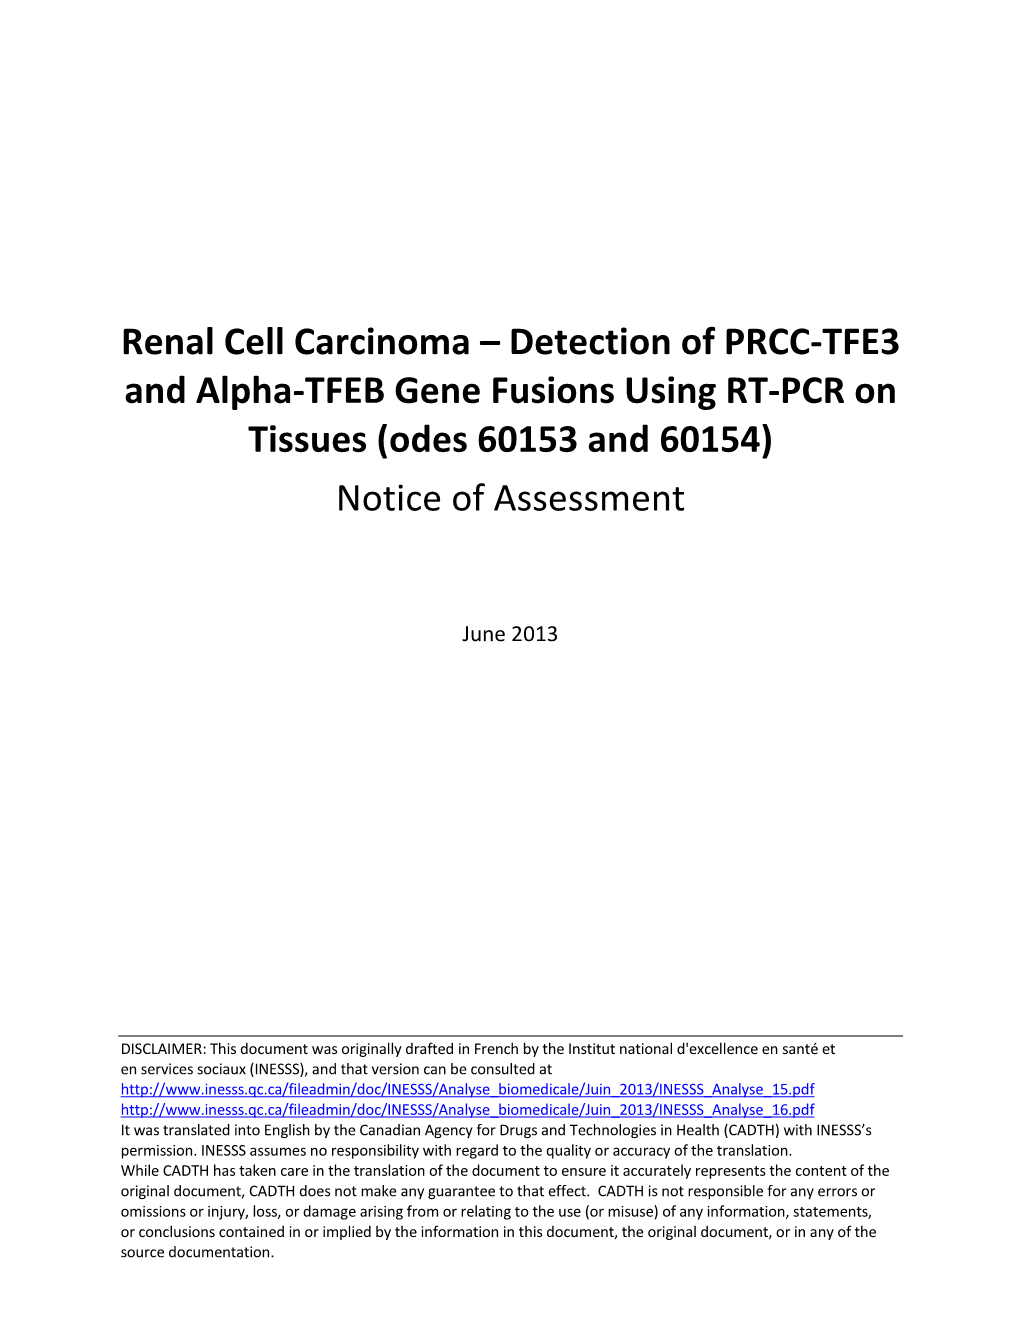 Renal Cell Carcinoma – Detection of PRCC-TFE3 and Alpha-TFEB Gene Fusions Using RT-PCR on Tissues (Odes 60153 and 60154) Notice of Assessment